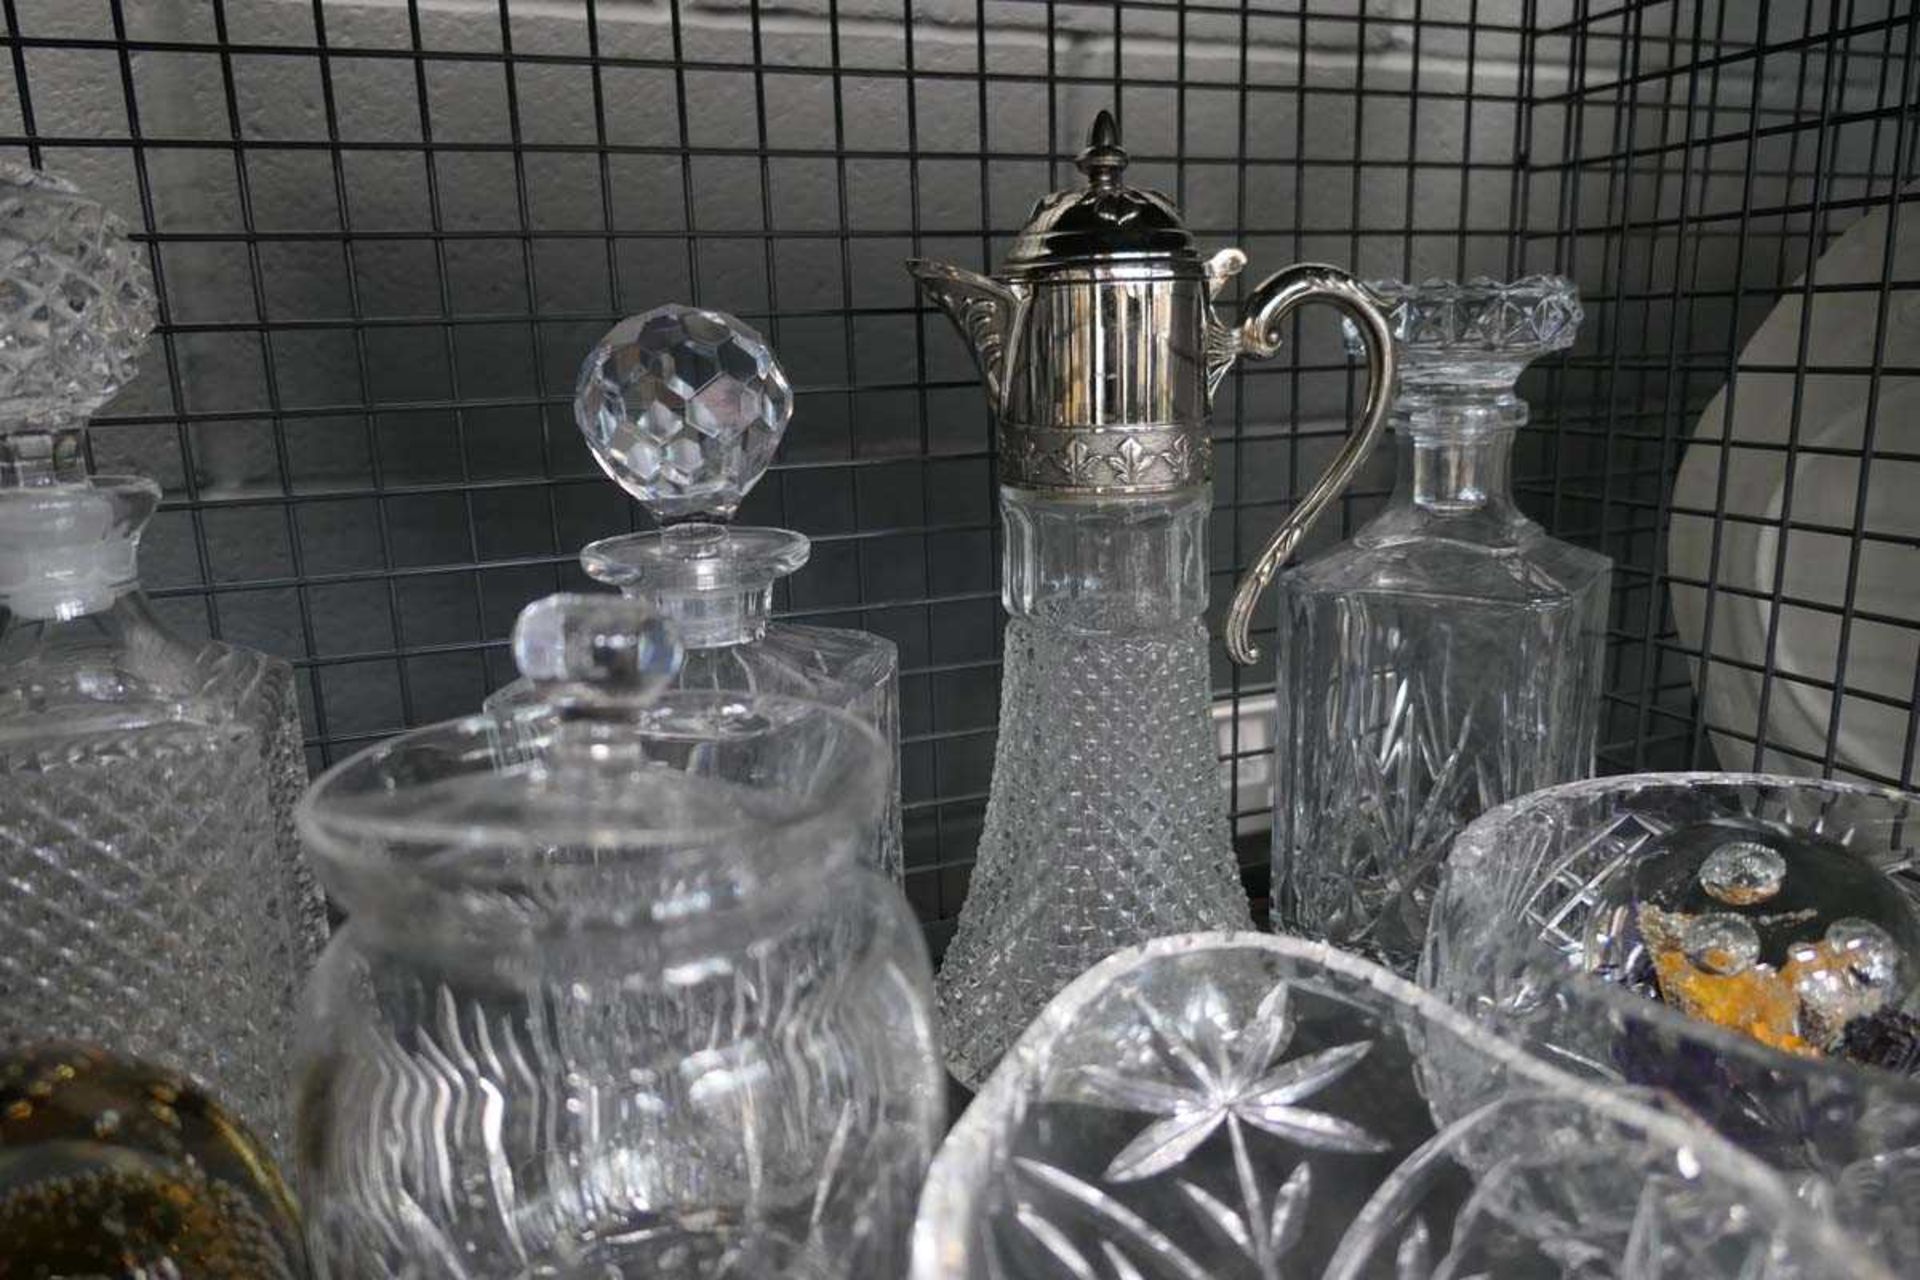 Cage containing a claret jug, decanters, biscuit barrel, paperweights, art deco style figure, jug - Image 2 of 4